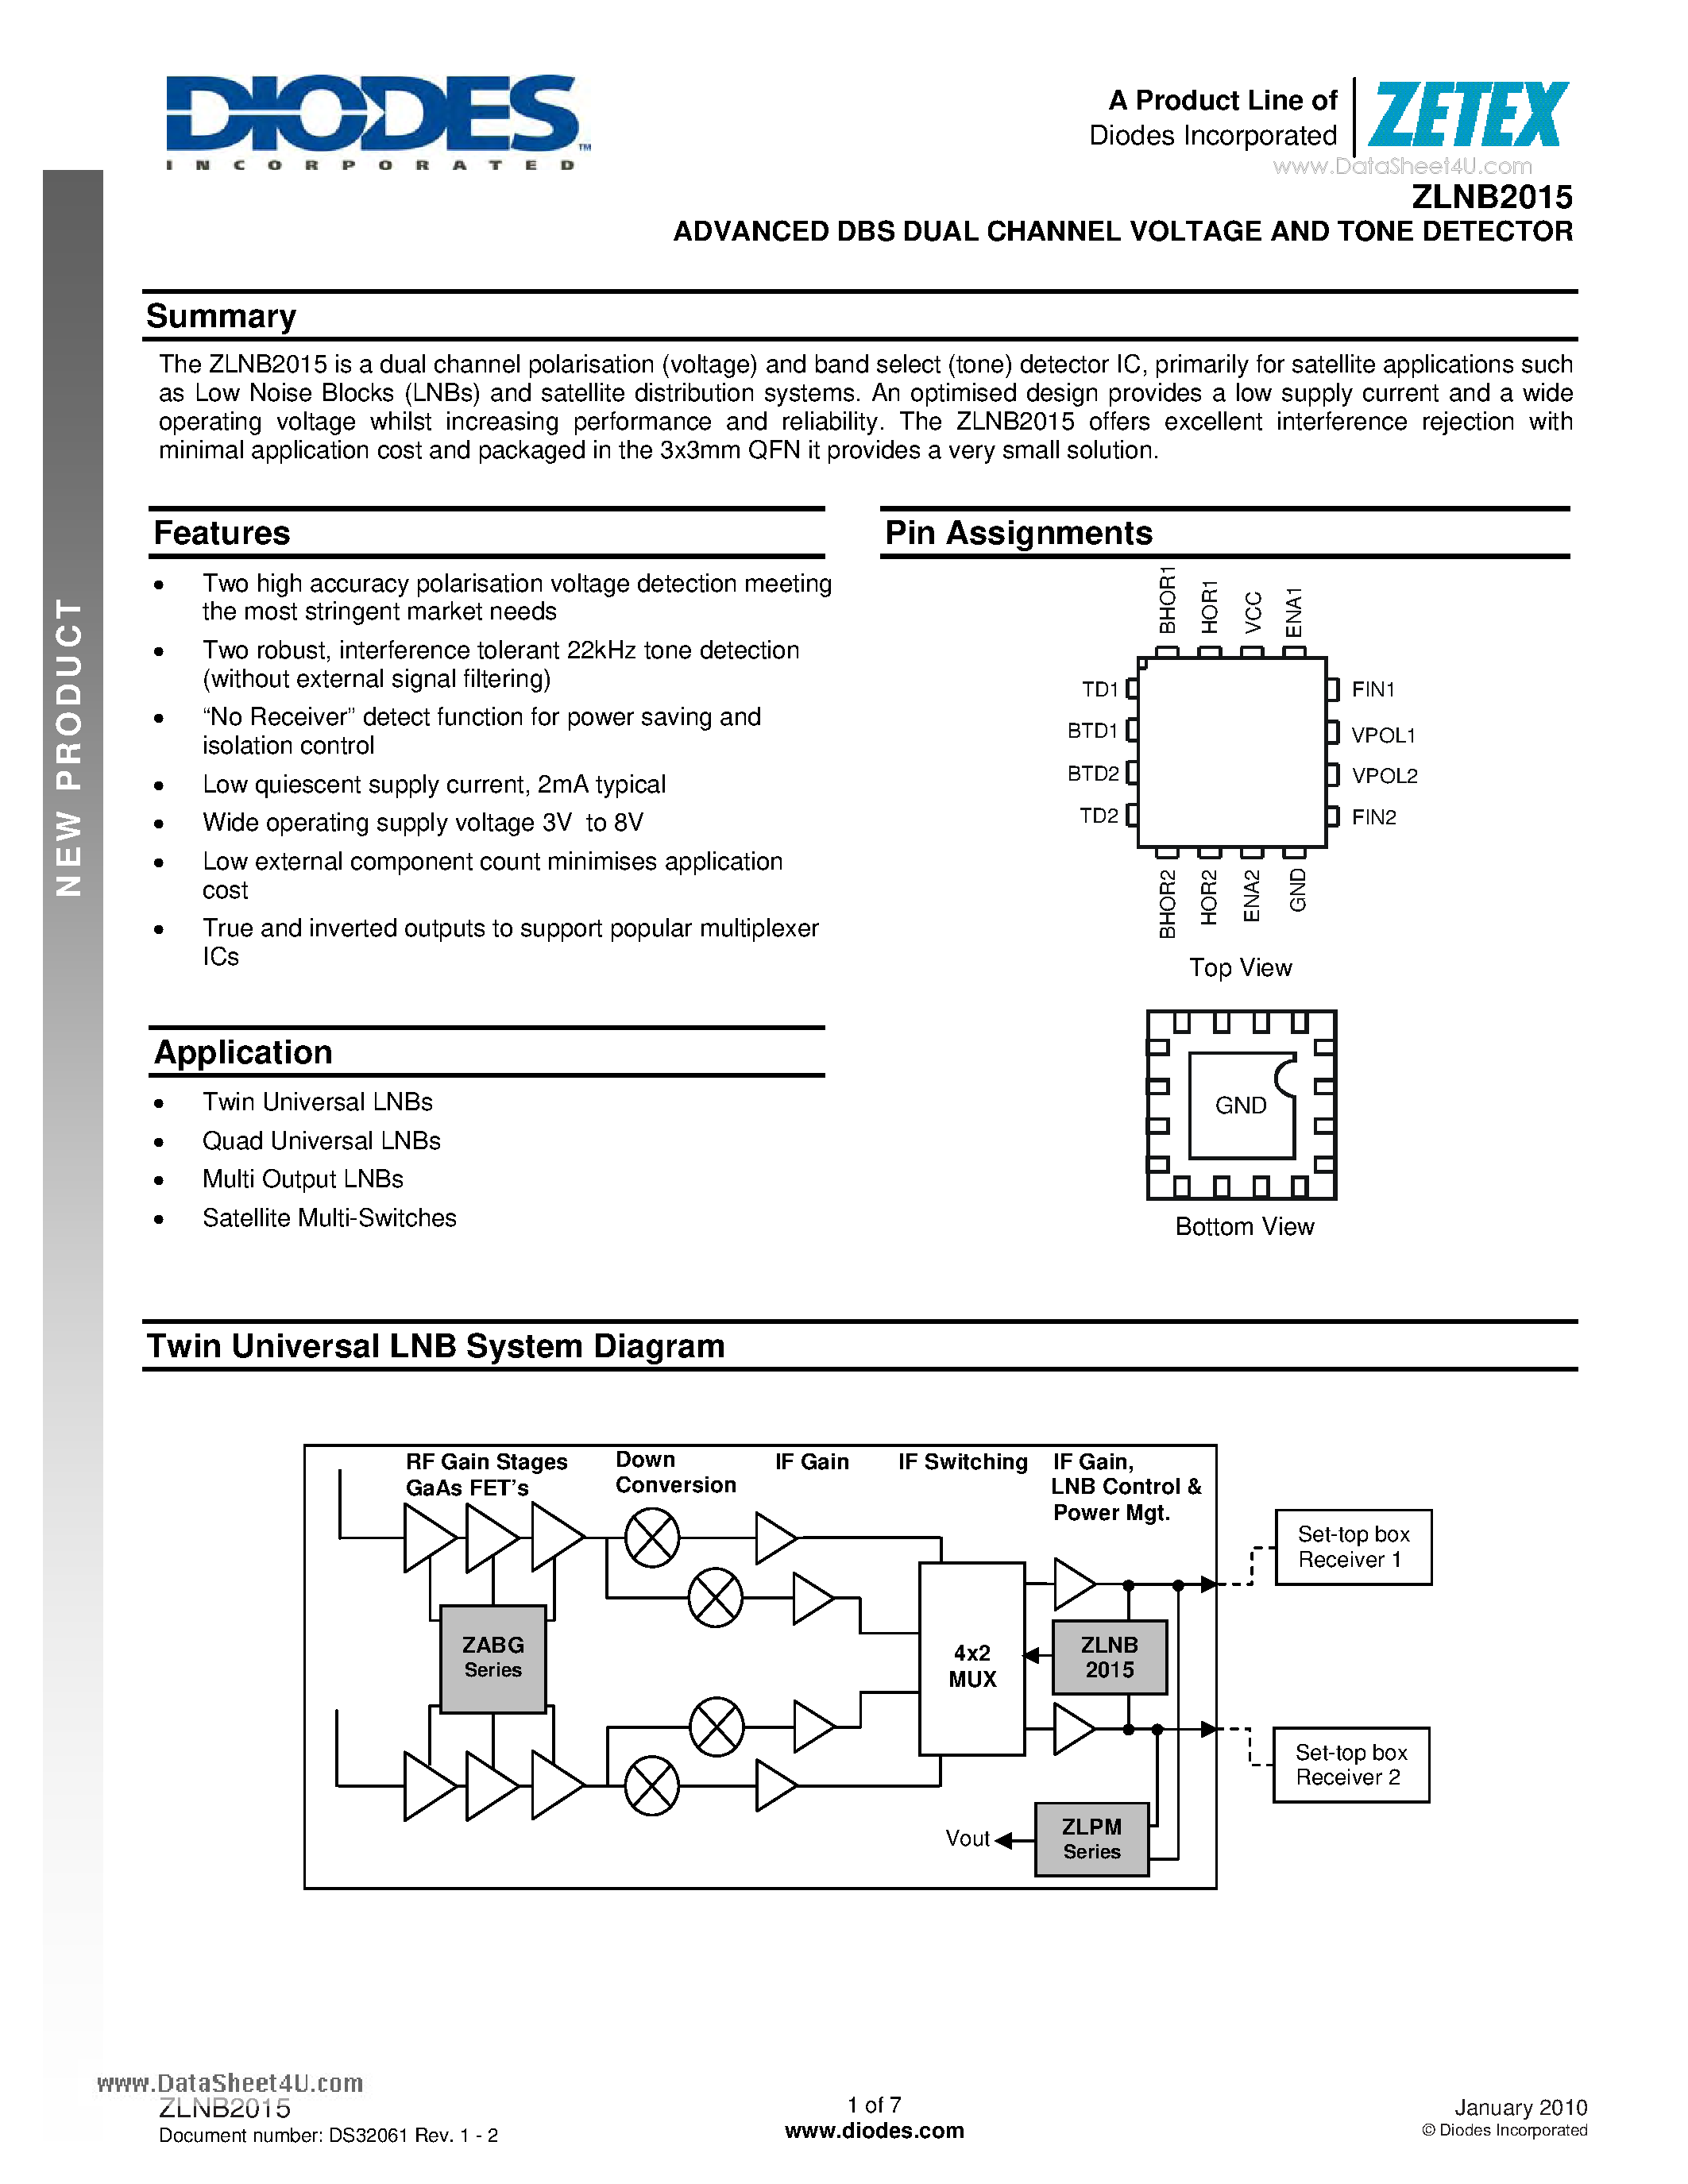 Datasheet ZLNB2015 - ADVANCED DBS DUAL CHANNEL VOLTAGE AND TONE DETECTOR page 1